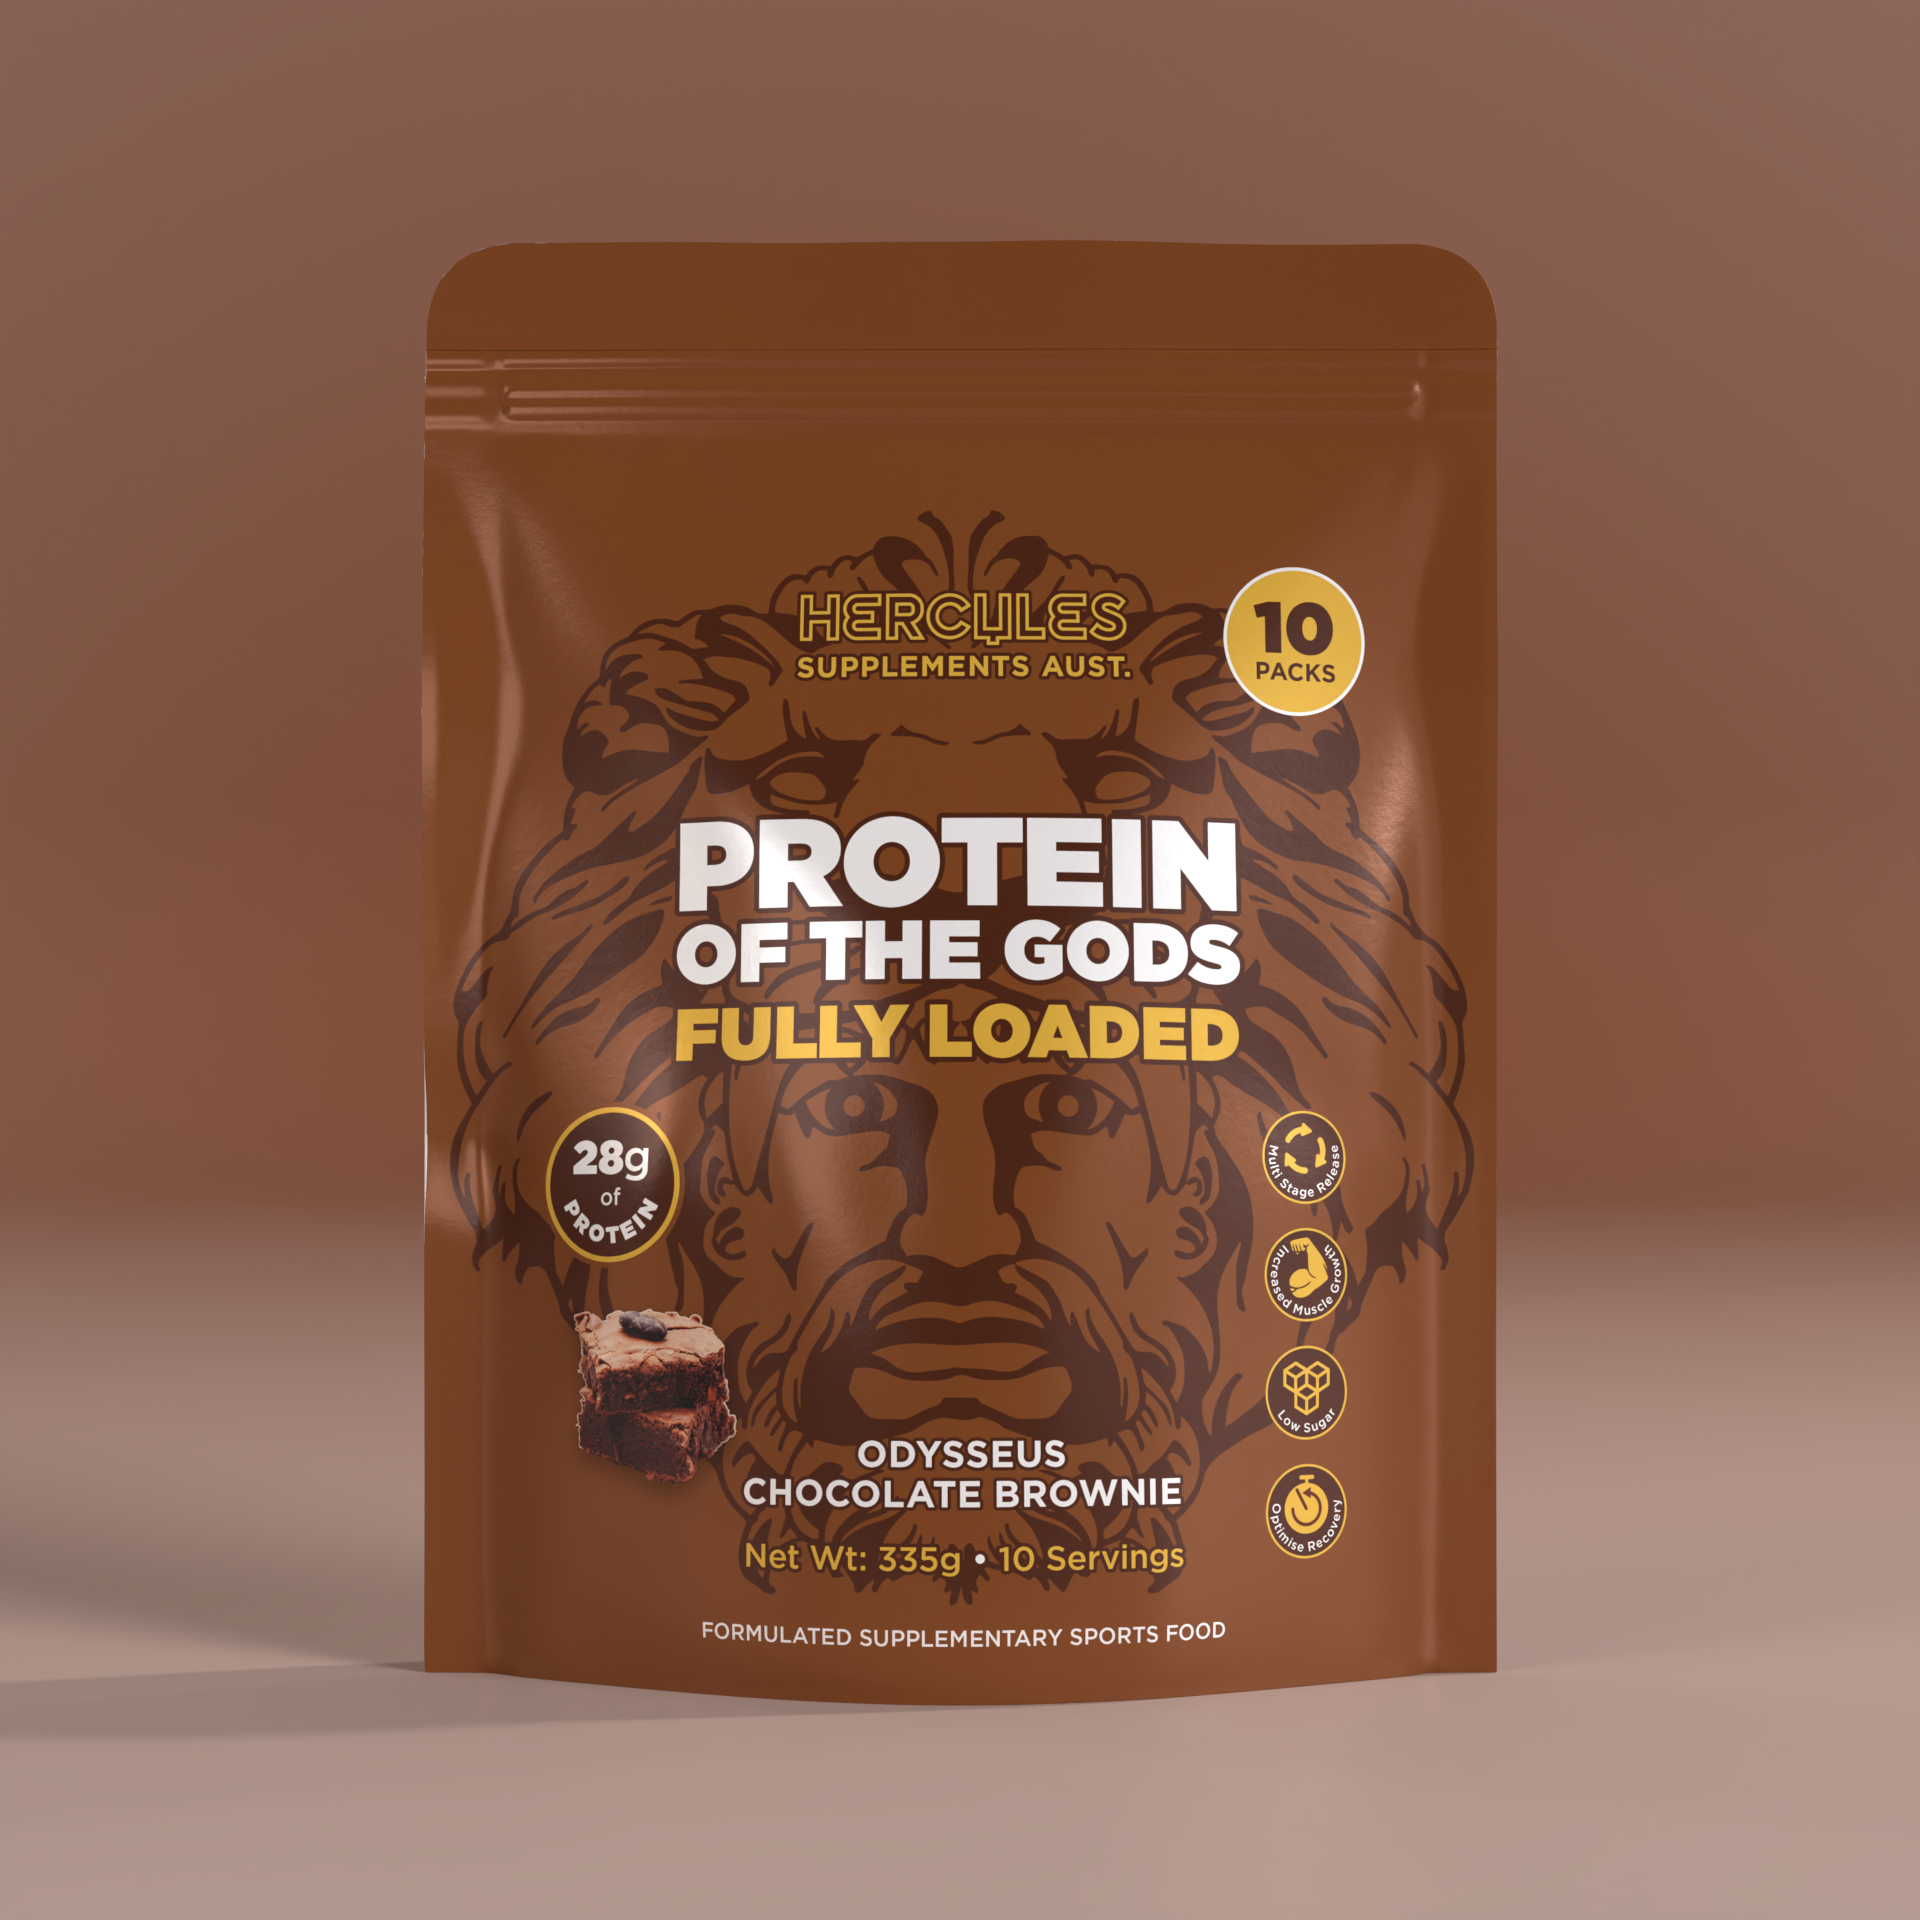 Protein of the Gods - Fully Loaded Chocolate Brownie loaded protein -10 Pack